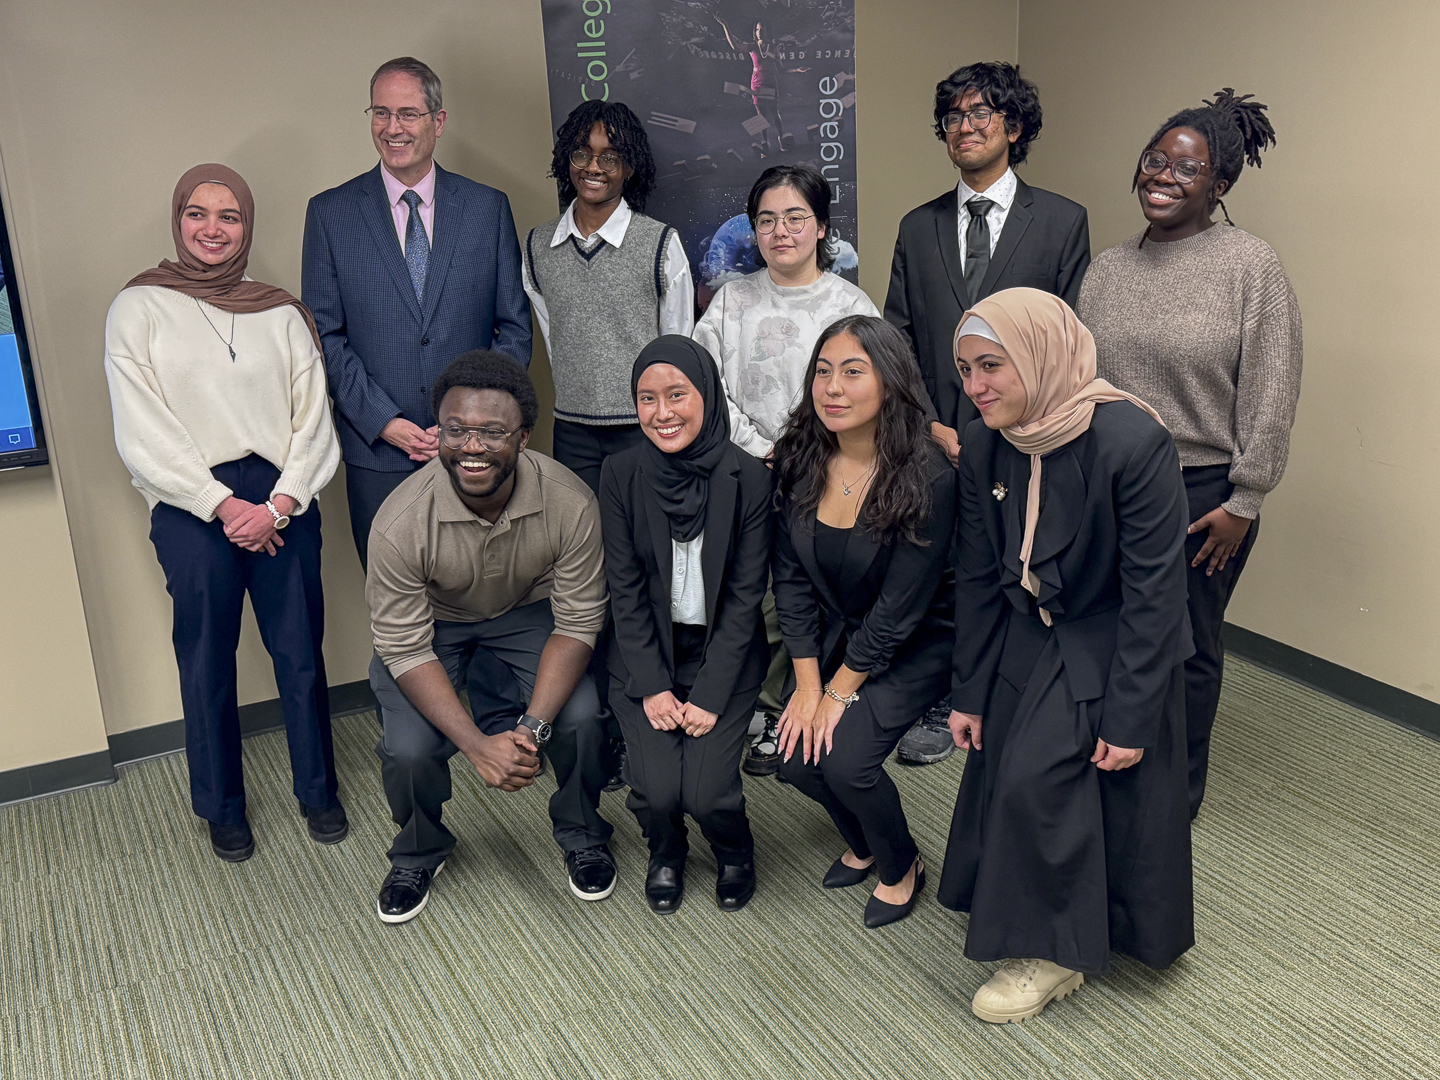 PLS students shined in this year’s Diversity Research Showcase